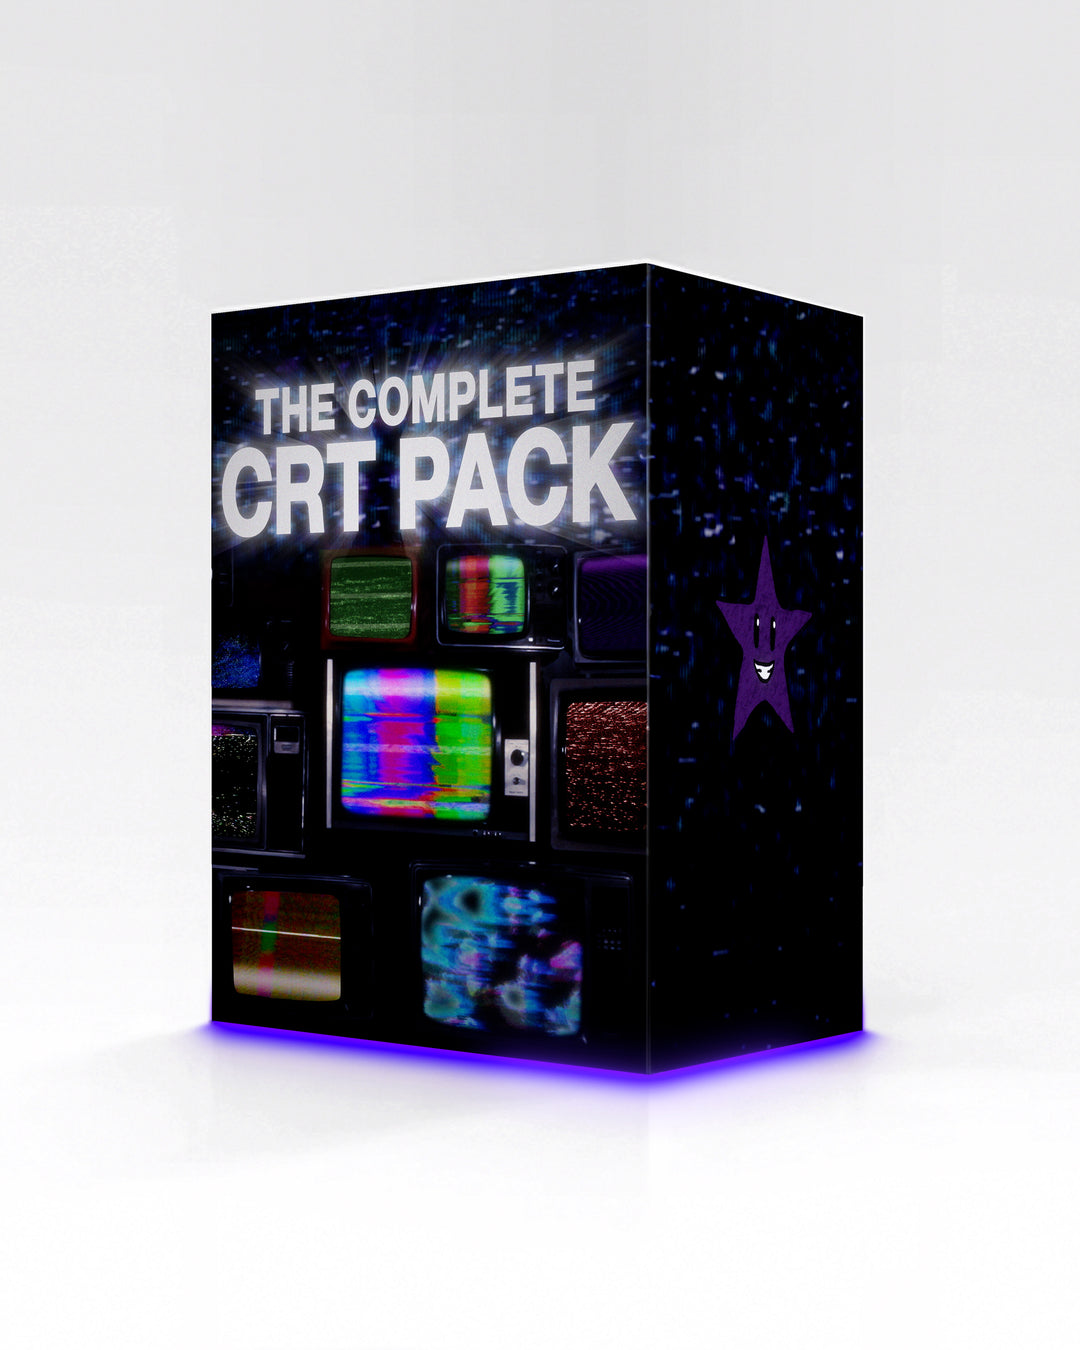 The Complete CRT Pack